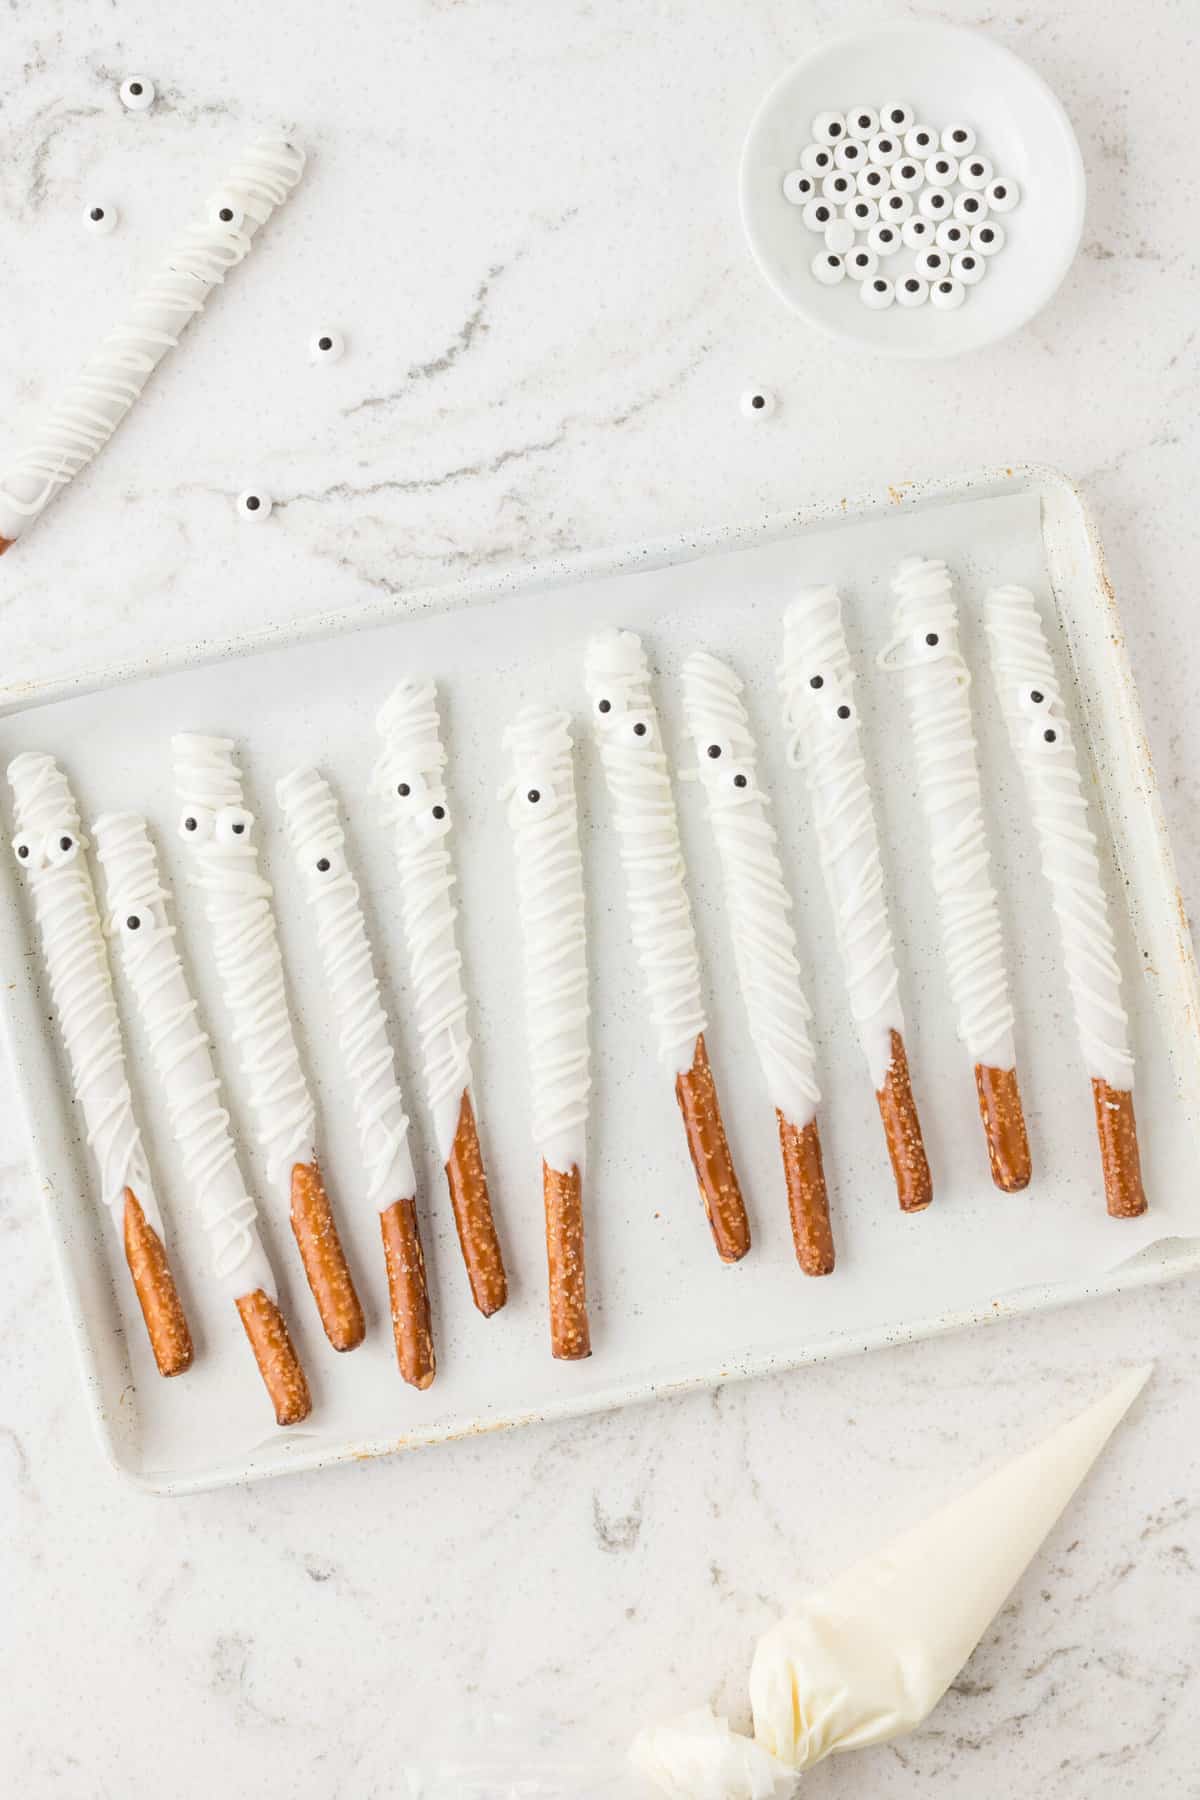 Once all of the Pretzel Rods are dipped, cut and end of the piping bag to drizzle almond bark back and forth to make mummy like lines on the pretzel rods.